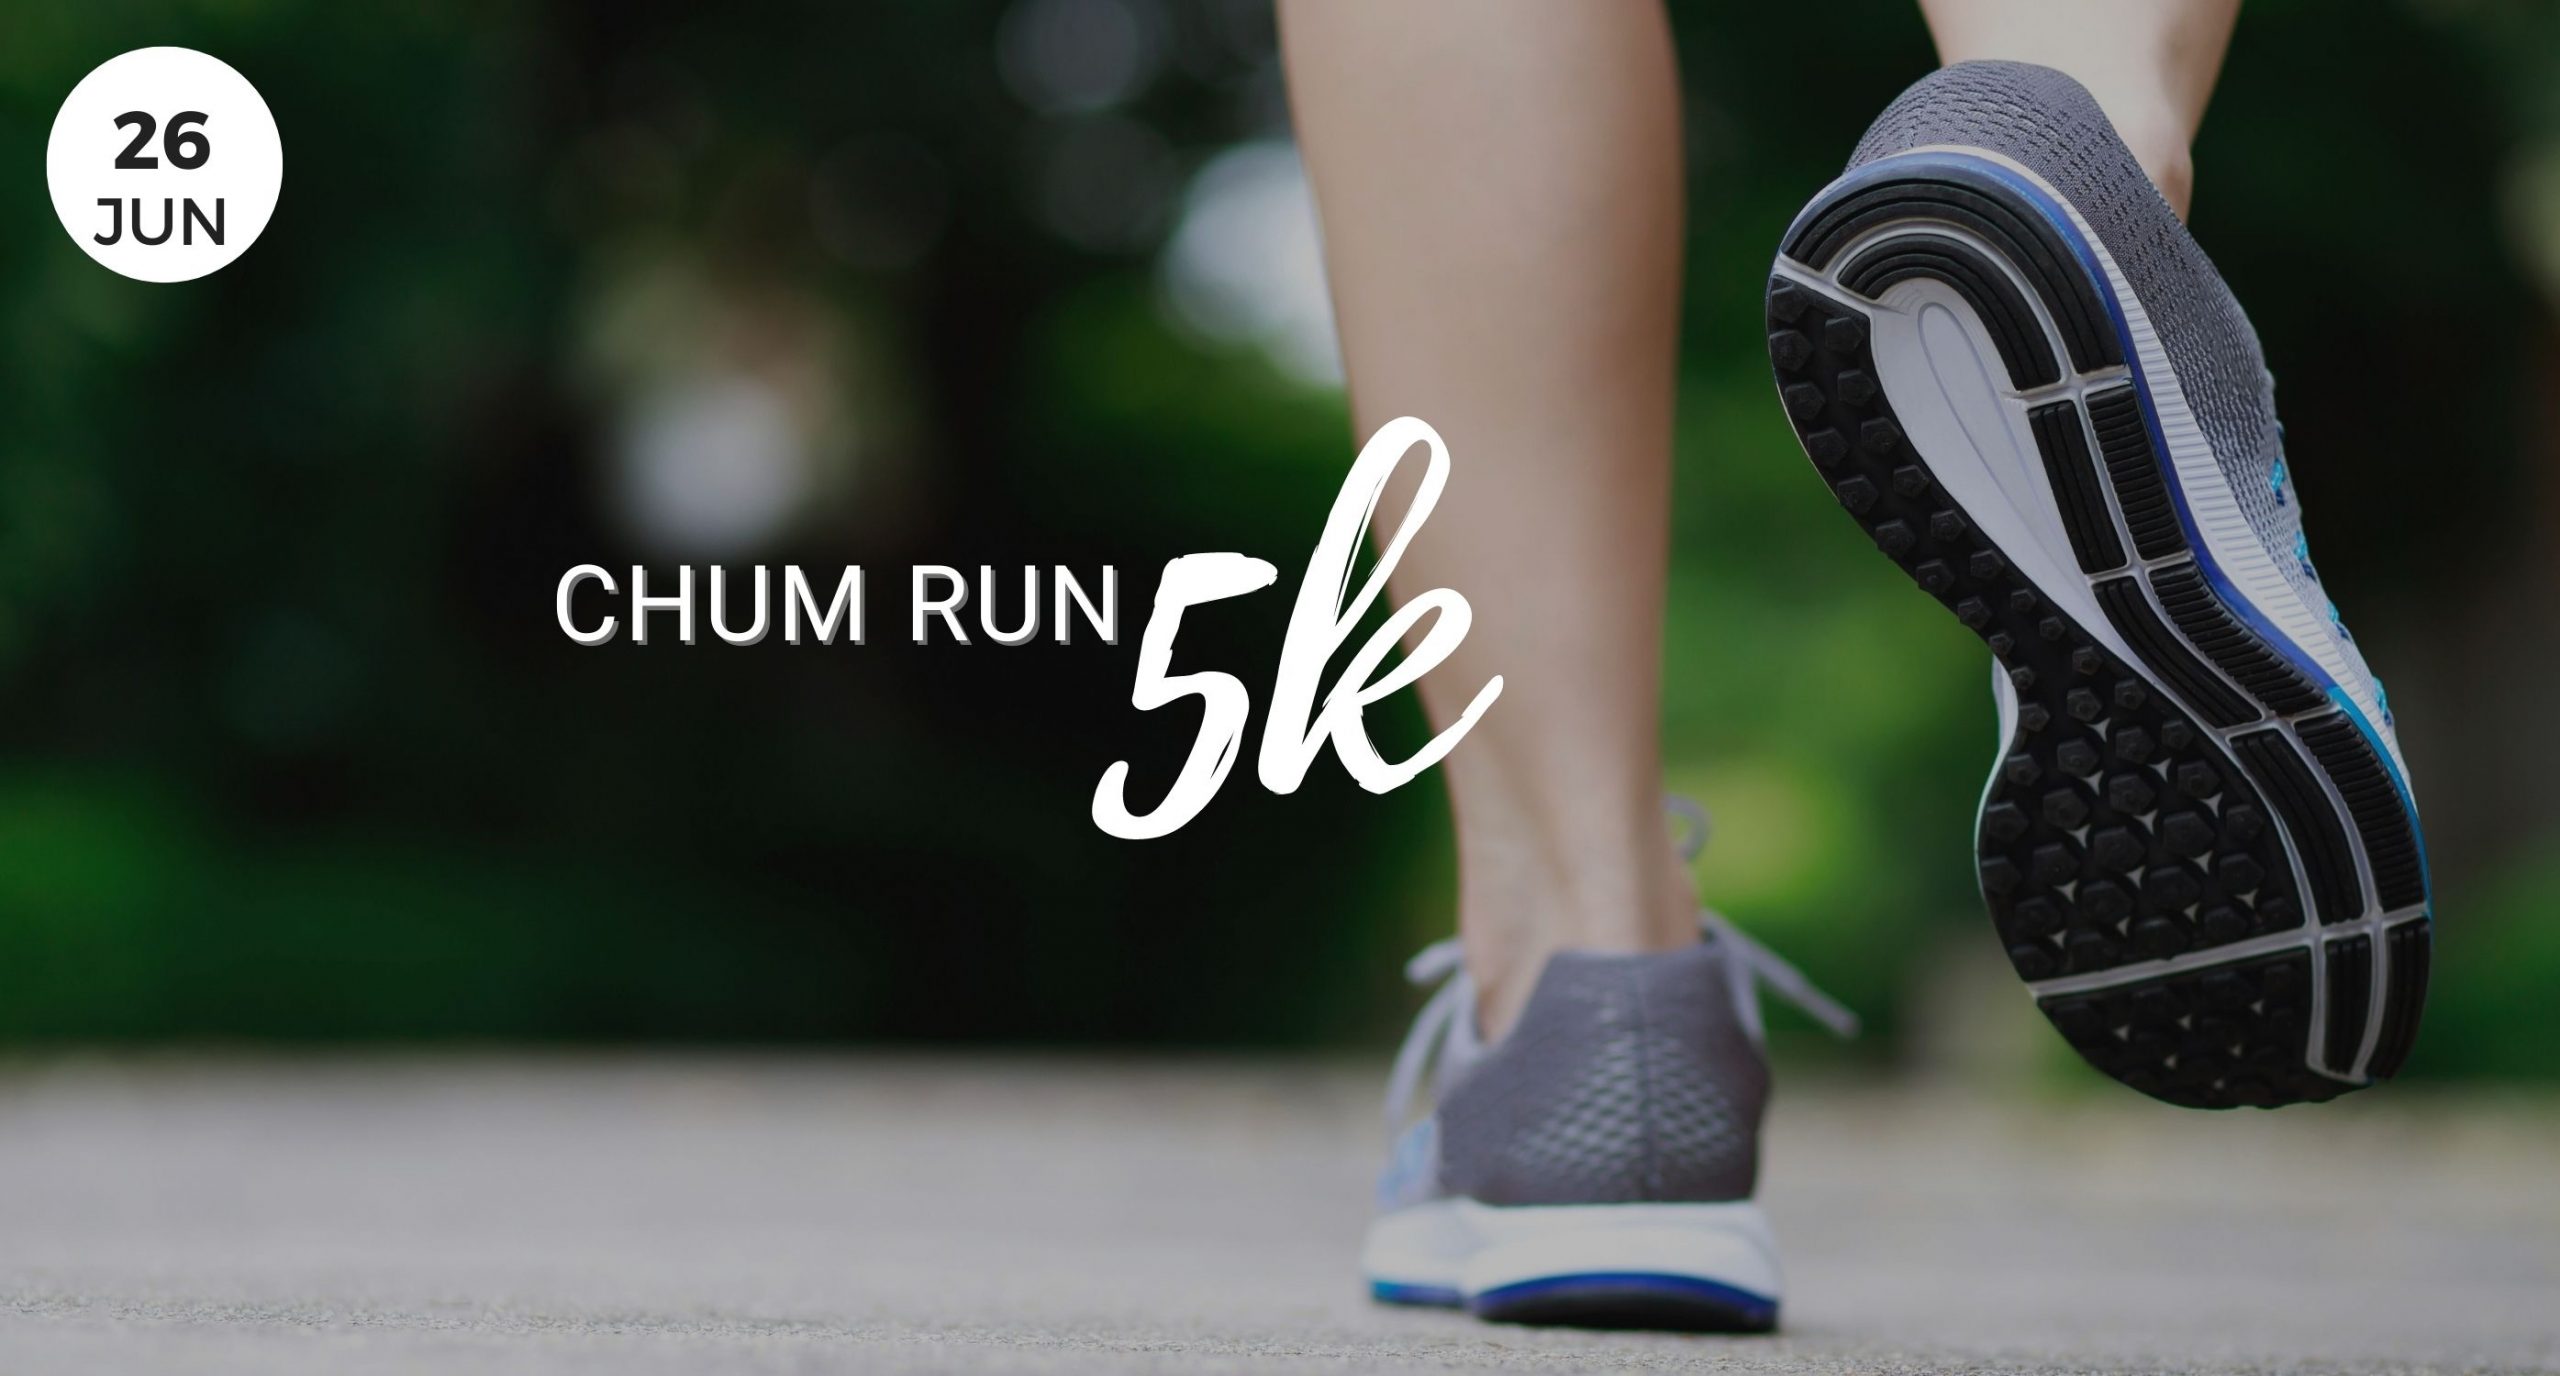 26 June, Chum Run 5k, South Whidbey, Local Events, Run, With Friends